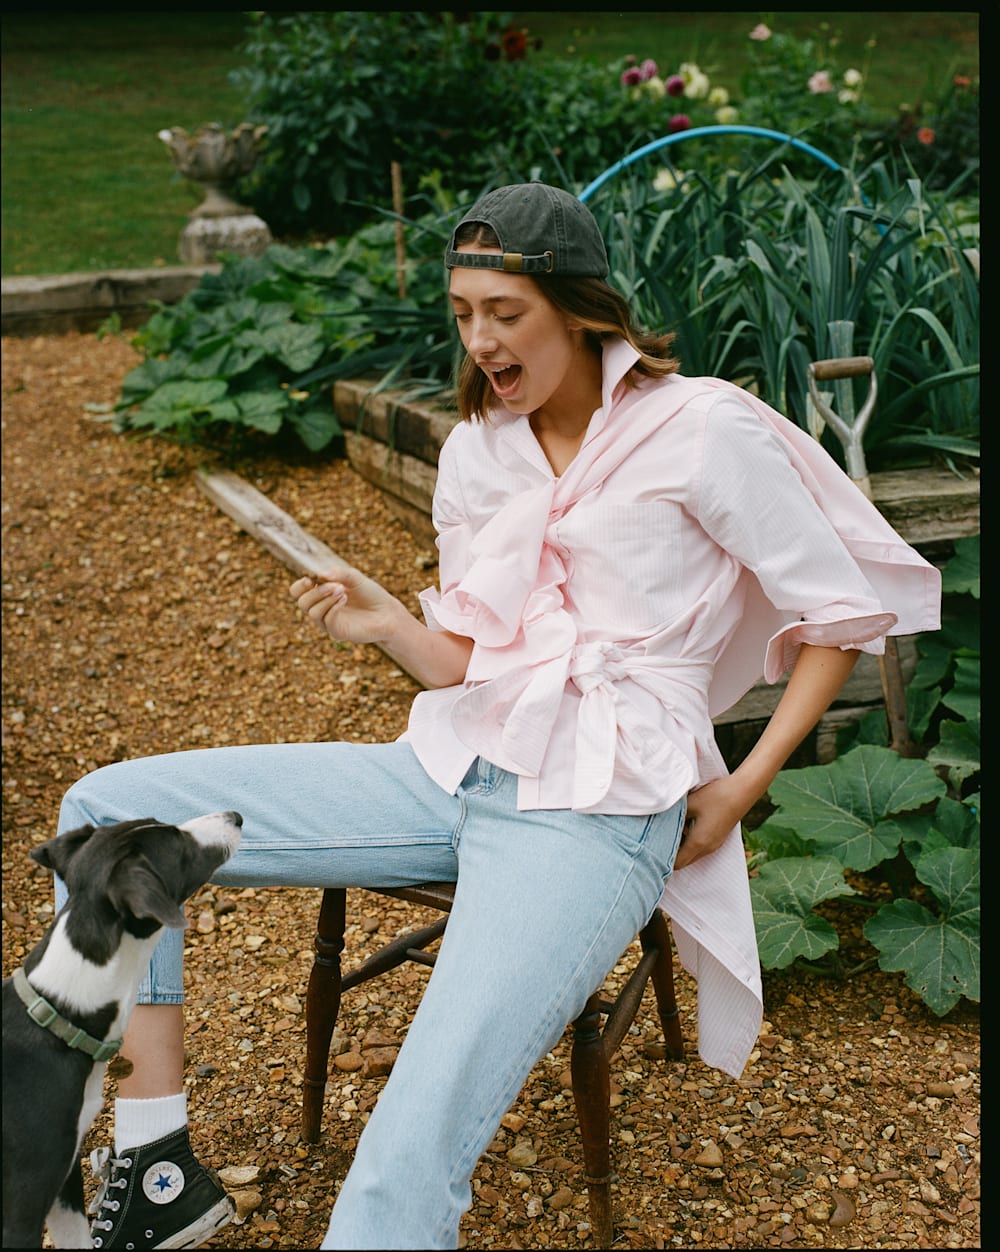 Woman in pink shirt and jeans